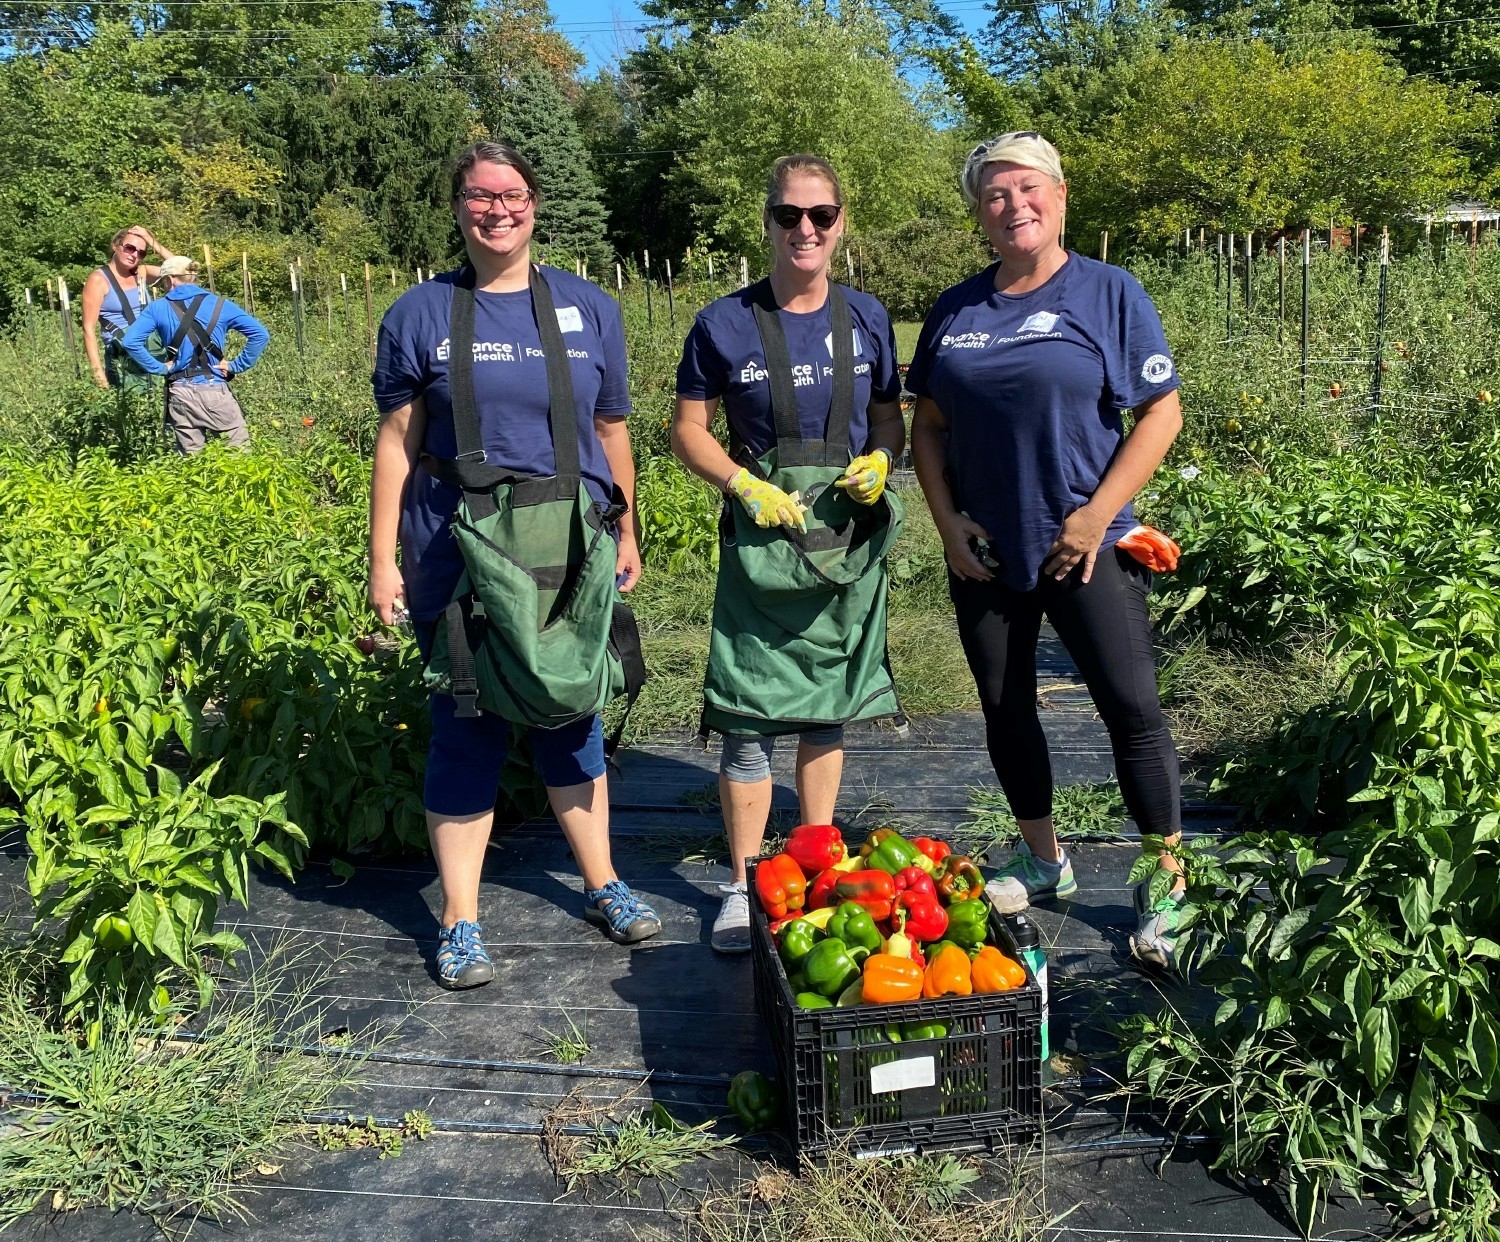 Elevance Health associate volunteers harvesting produce at a multi-disciplinary farm for a large food distribution event